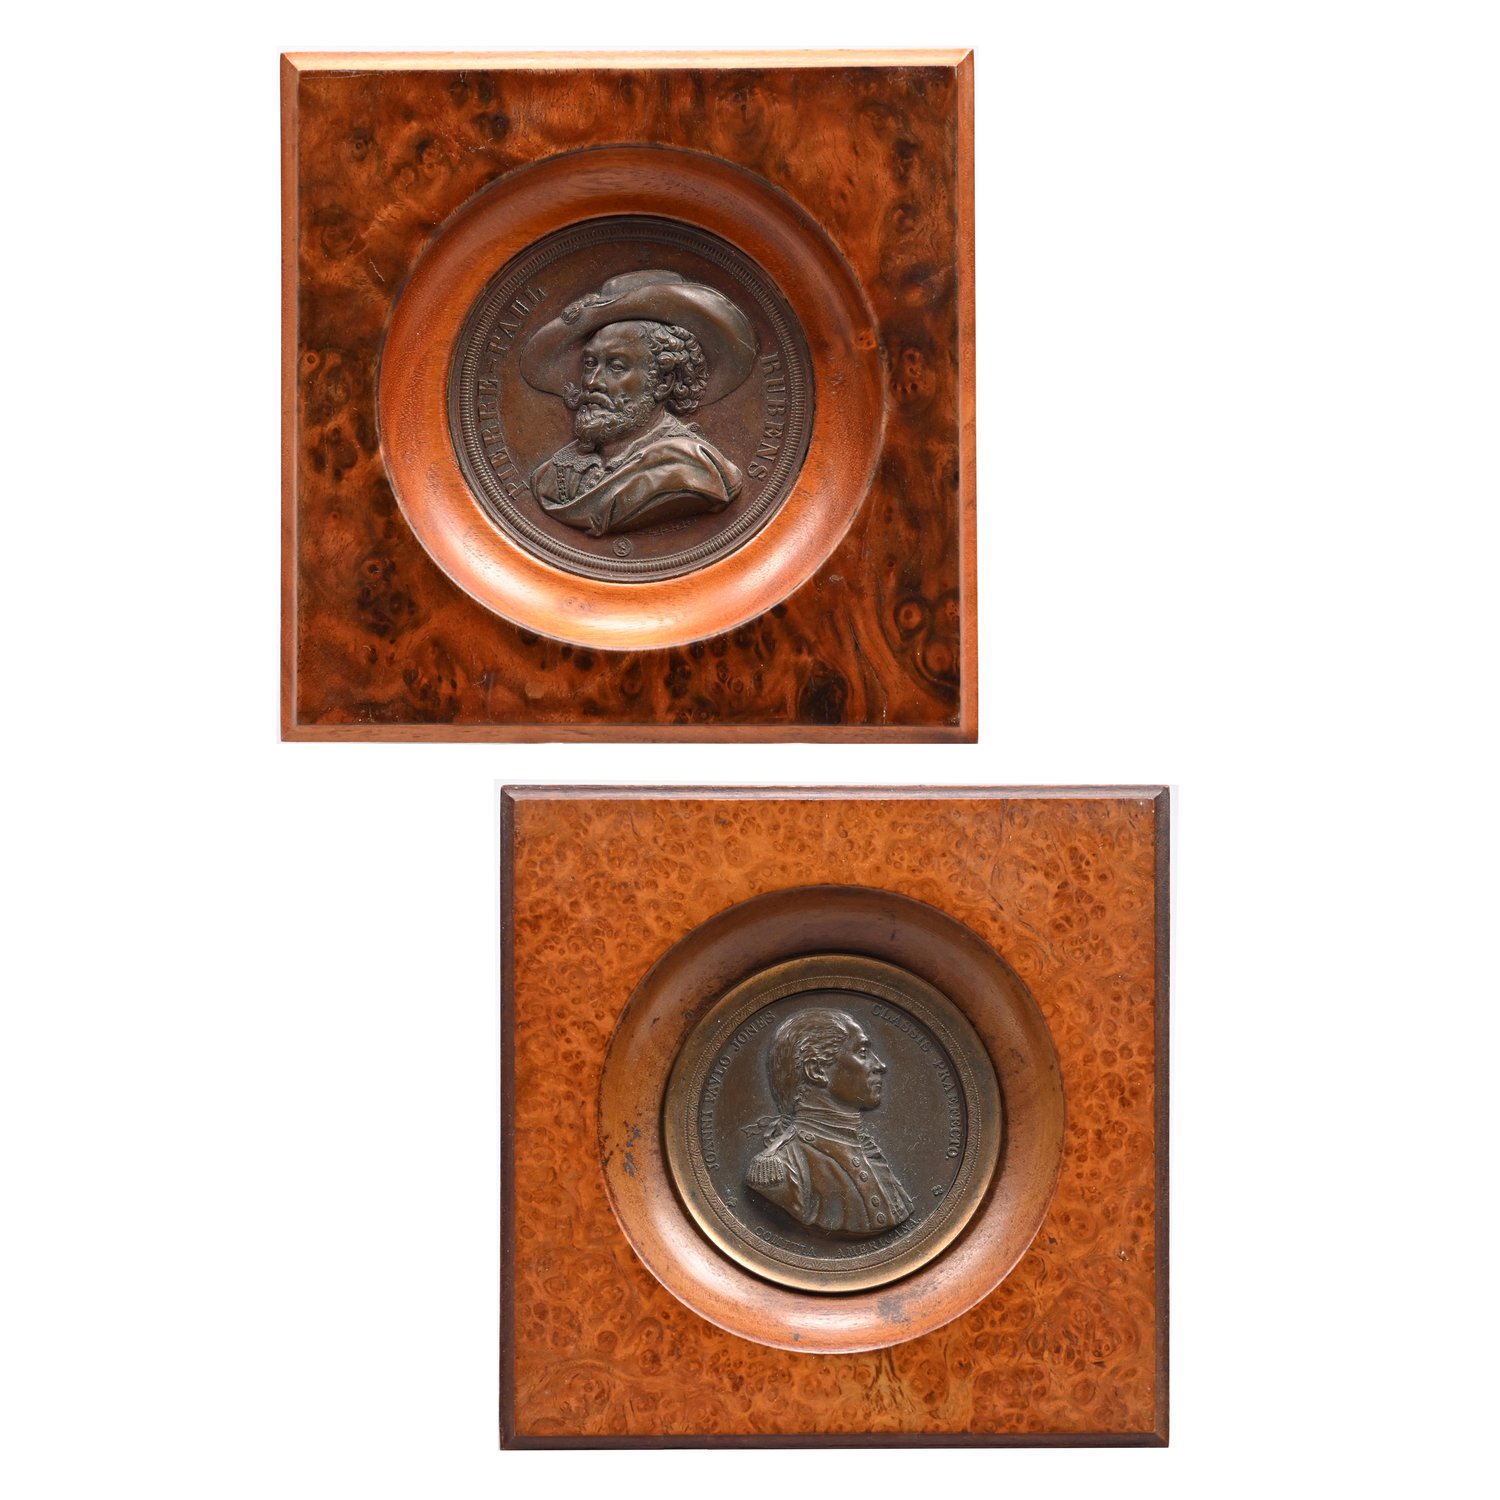 Image of Very Fine Pair of Burlwood and Walnut framed 19th century French and Belgian medals by A. Dupre and 